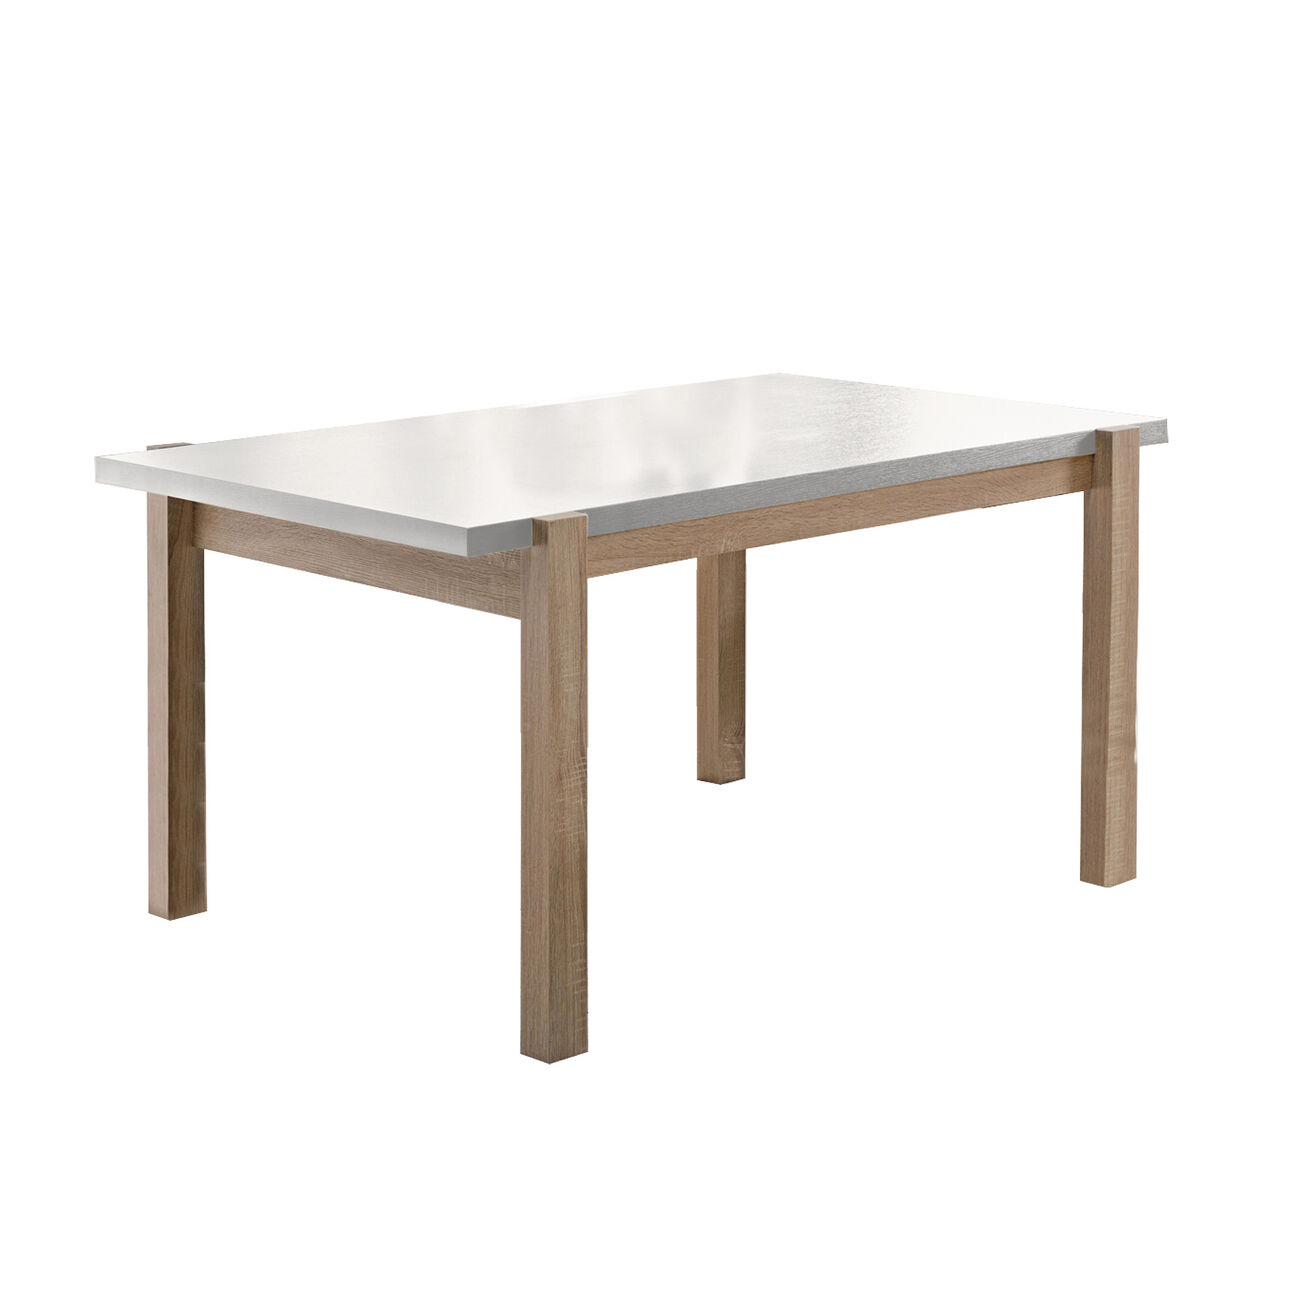 Rectangular Wooden Dining Table with Straight Legs, White and Brown